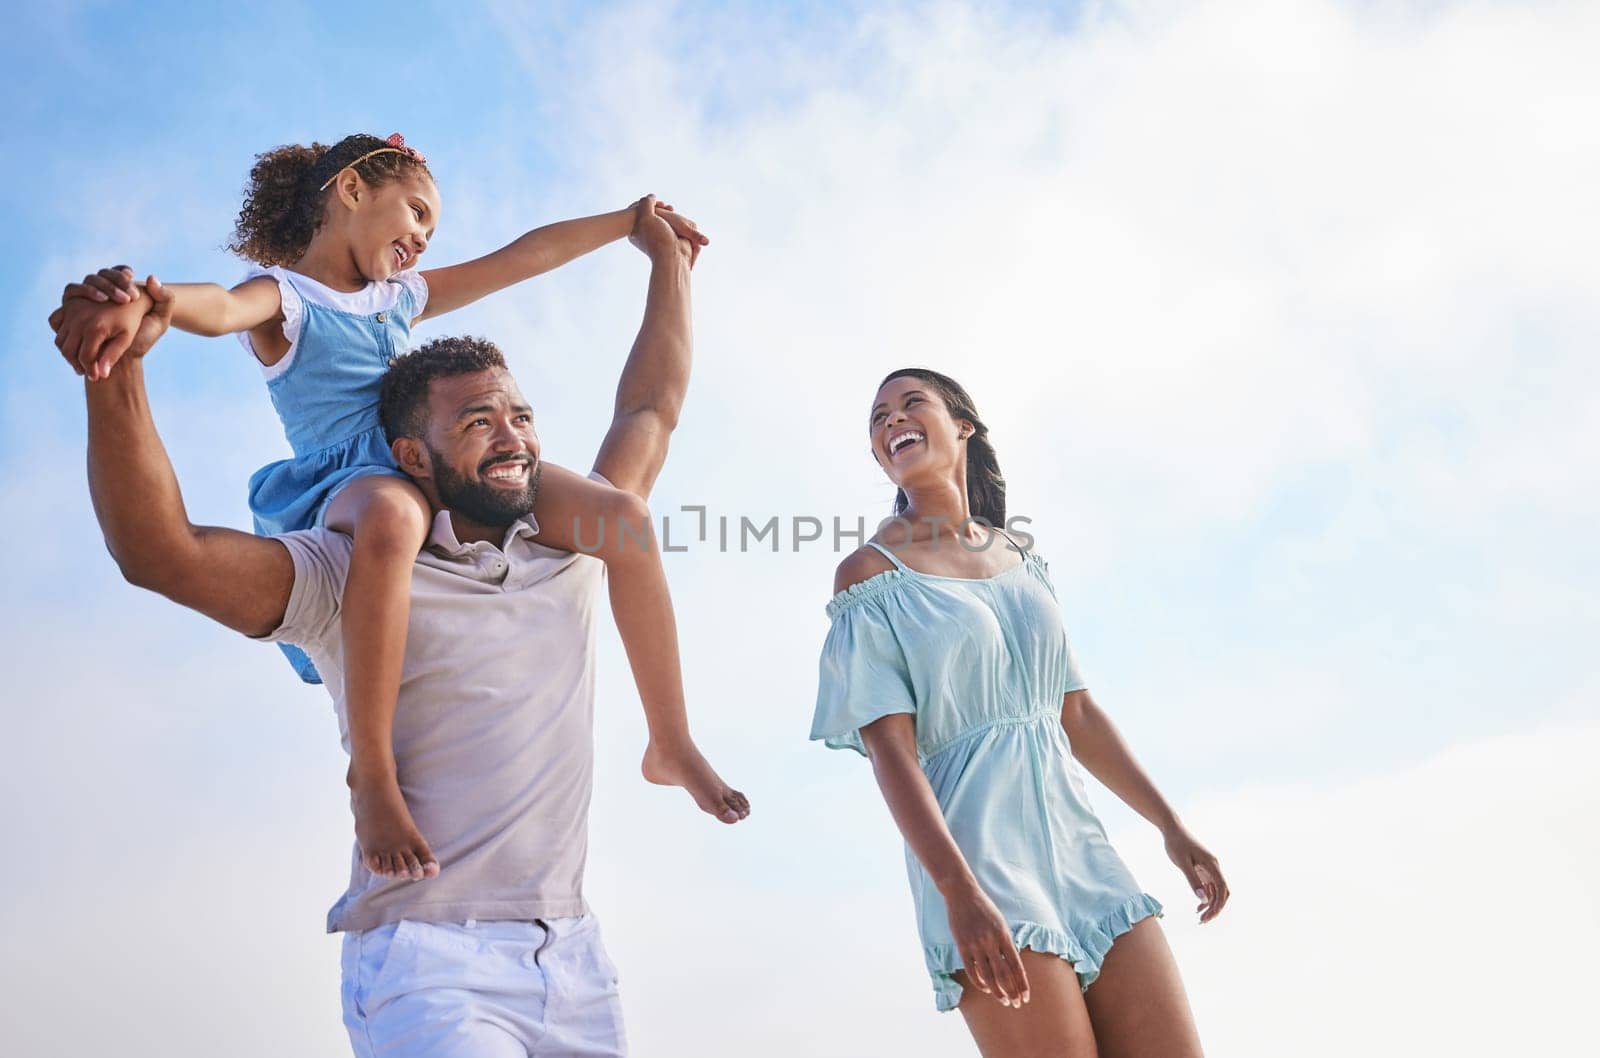 Piggyback, sea or parents walking with a child for a holiday vacation together with happiness in summer. Holding hands, mother and father playing or enjoying family time with a happy girl or kid.